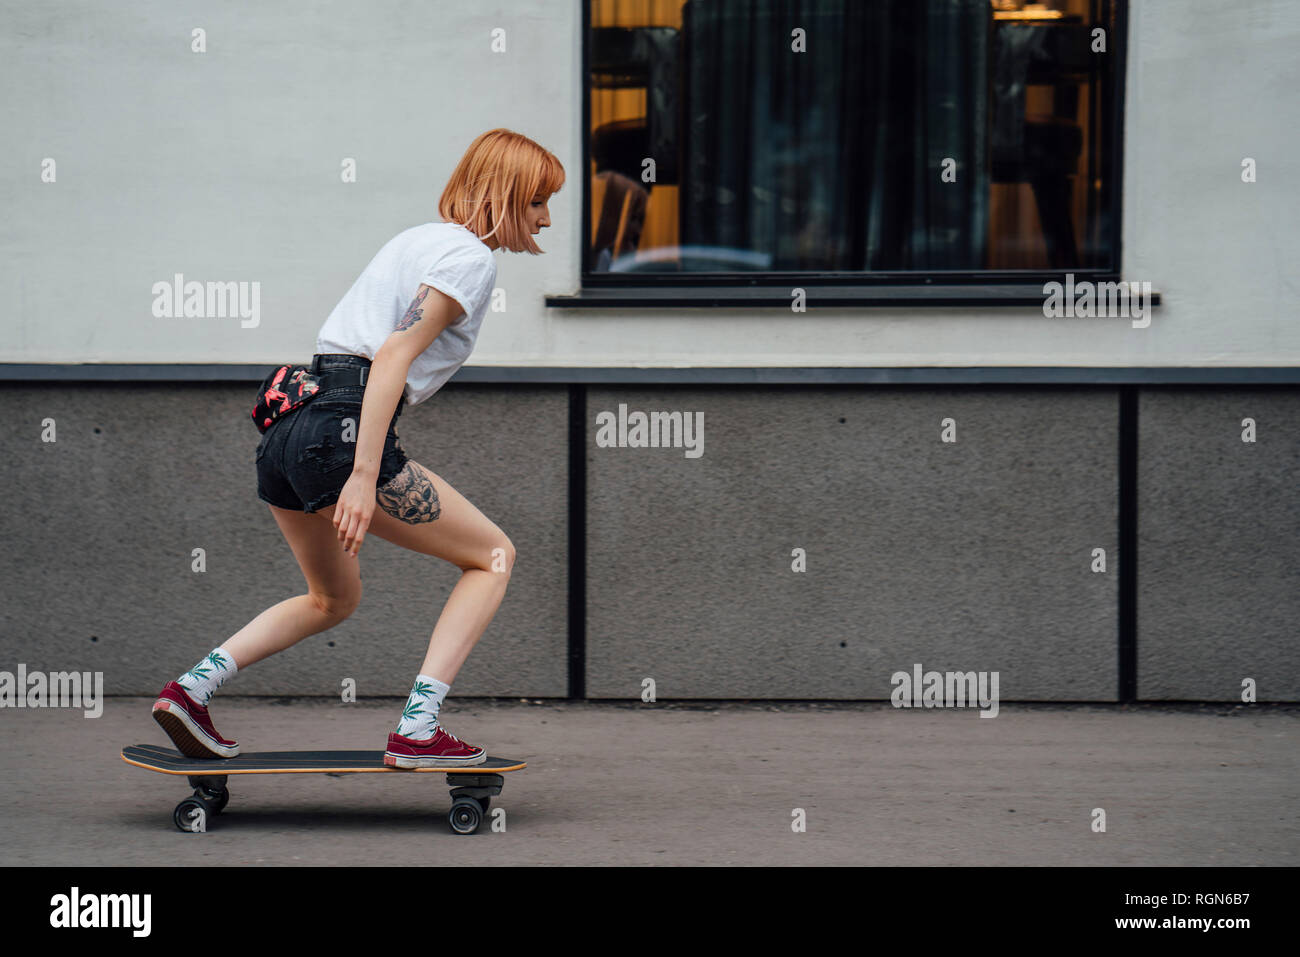 Young woman riding carver skateboard on the sidewalk Stock Photo